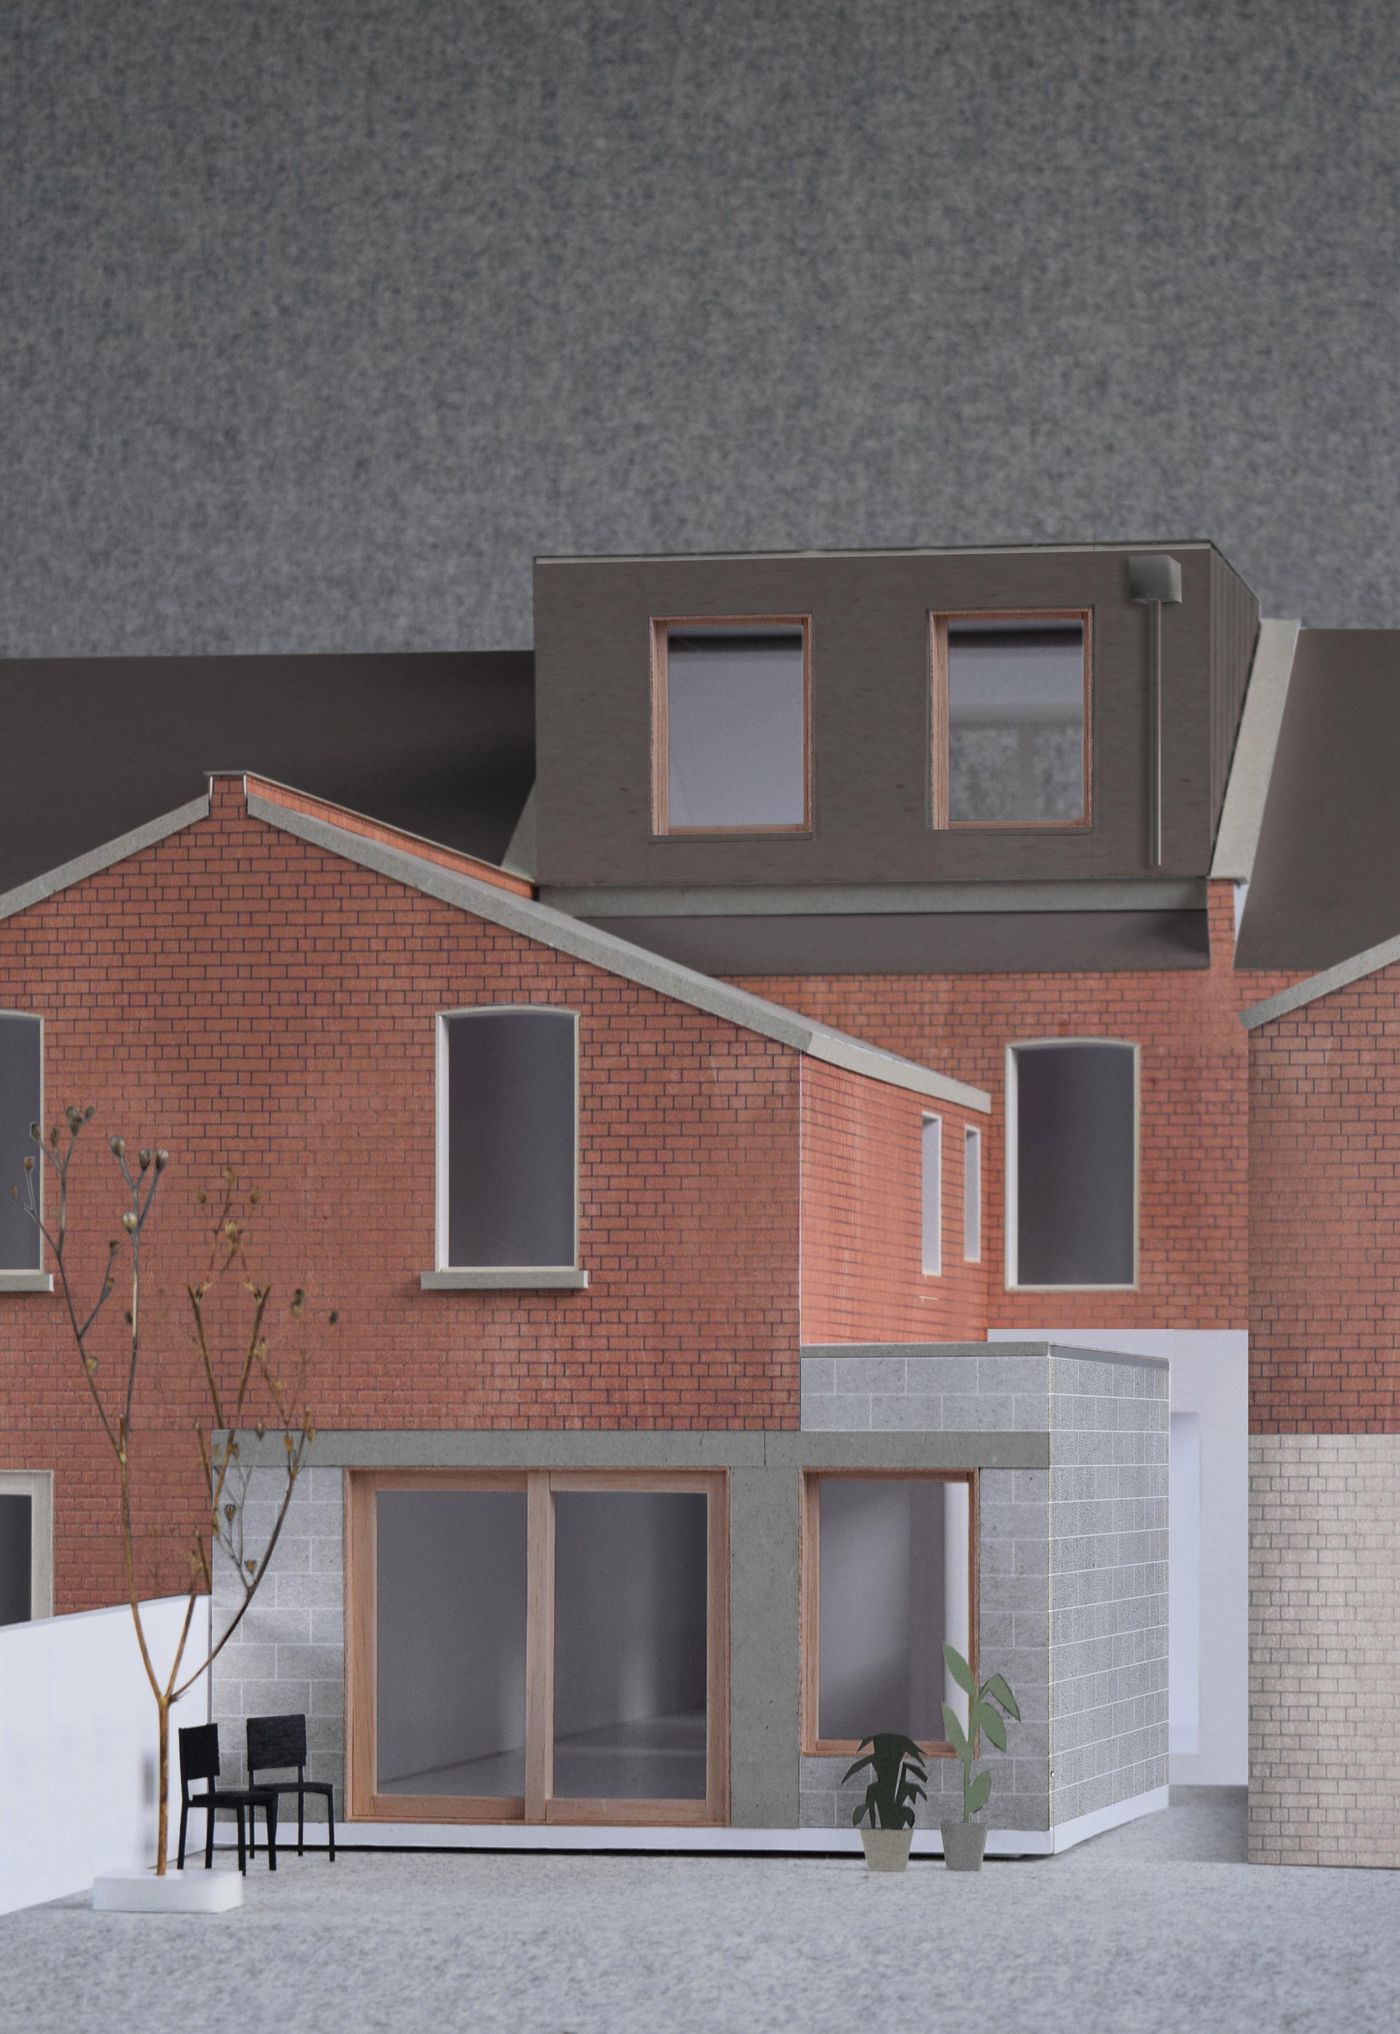 External view of the proposed rear extensions for From Works' Frayne Road project in Bristol.